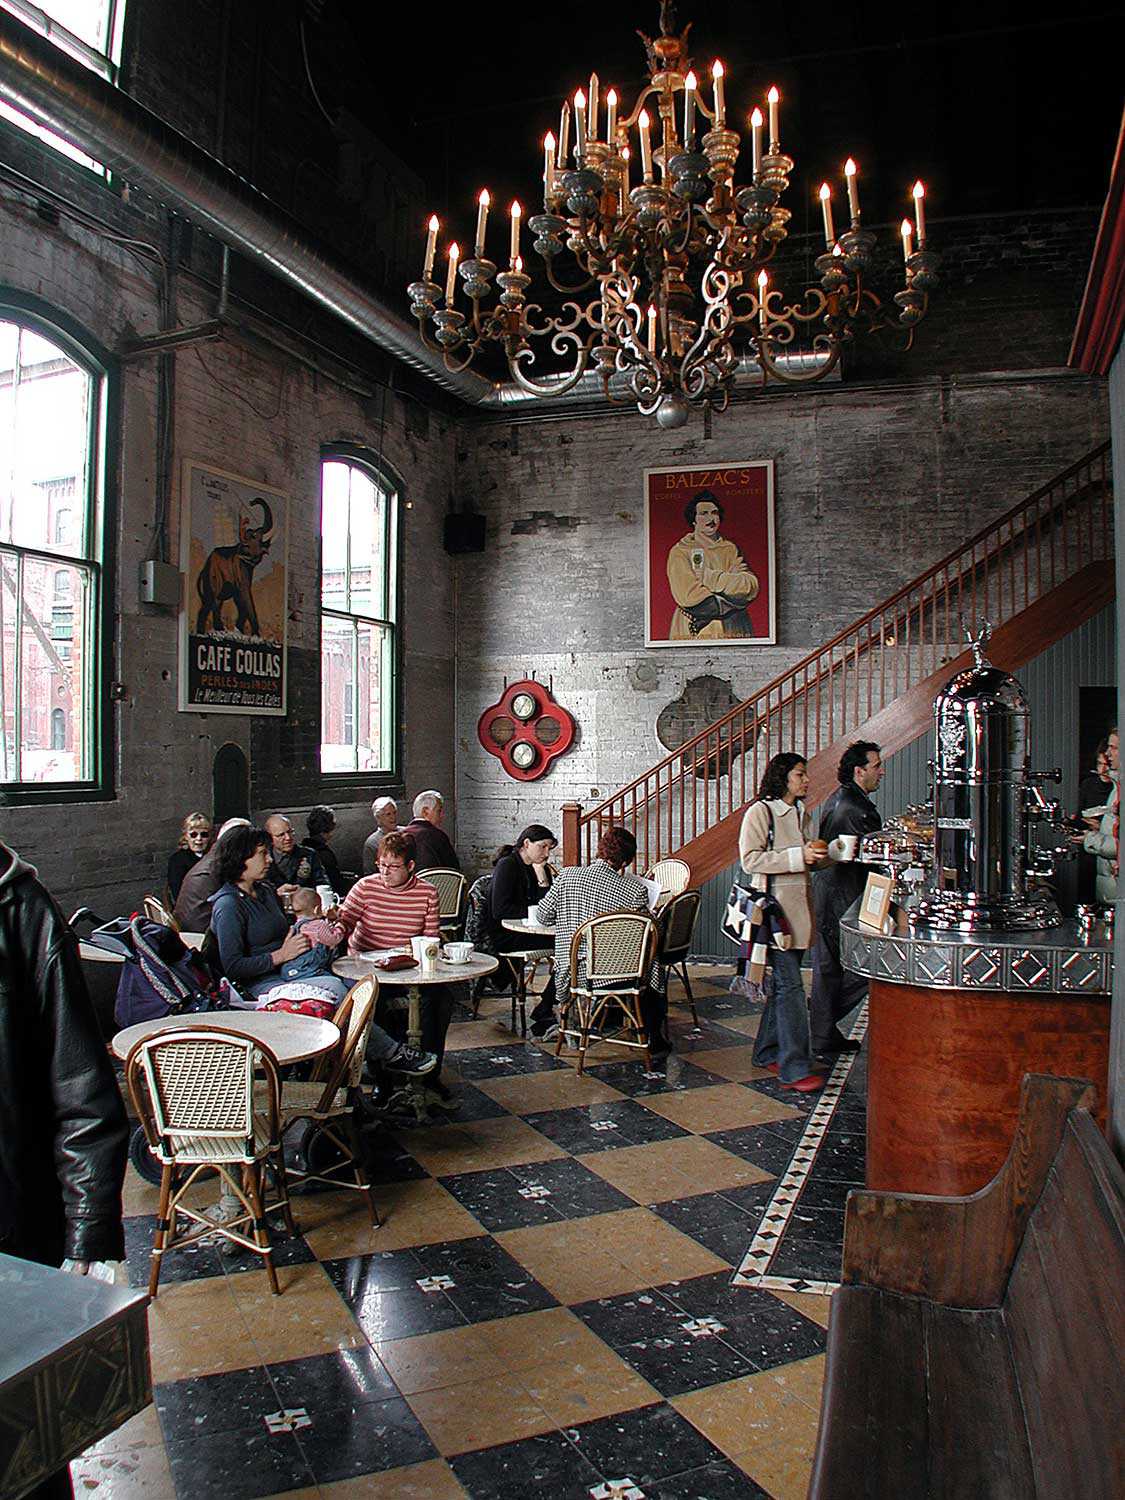 Toronto’s Distillery District is an excellent example of adaptive re-use of heritage buildings. (Shown here: Balzac Café at the Distillery District; Photo: Thane Lucas)